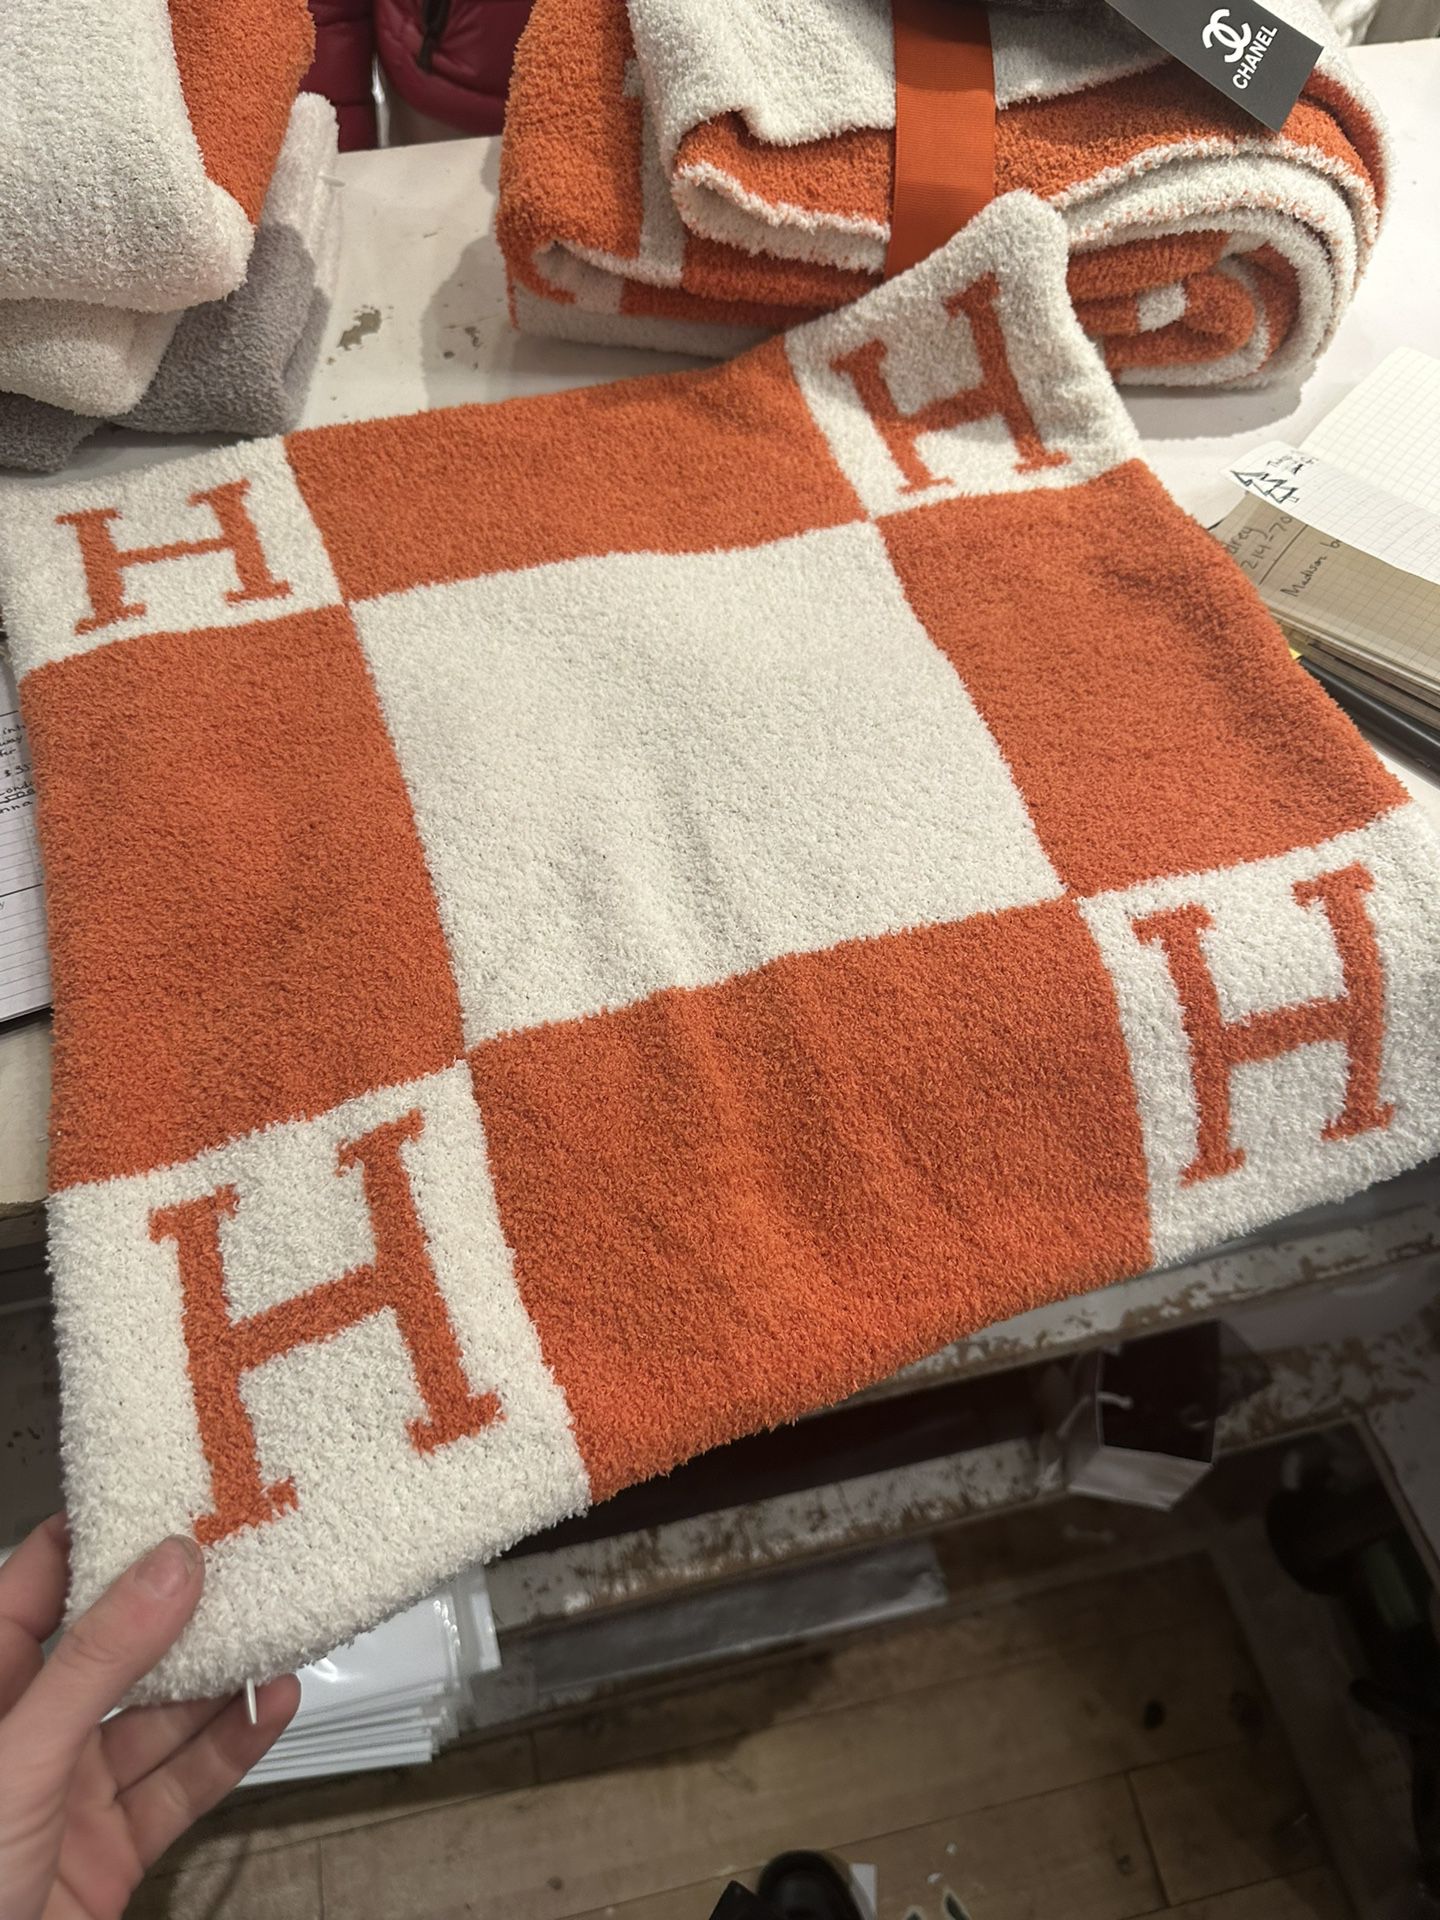 Hermes Blanket Large for Sale in New York, NY - OfferUp